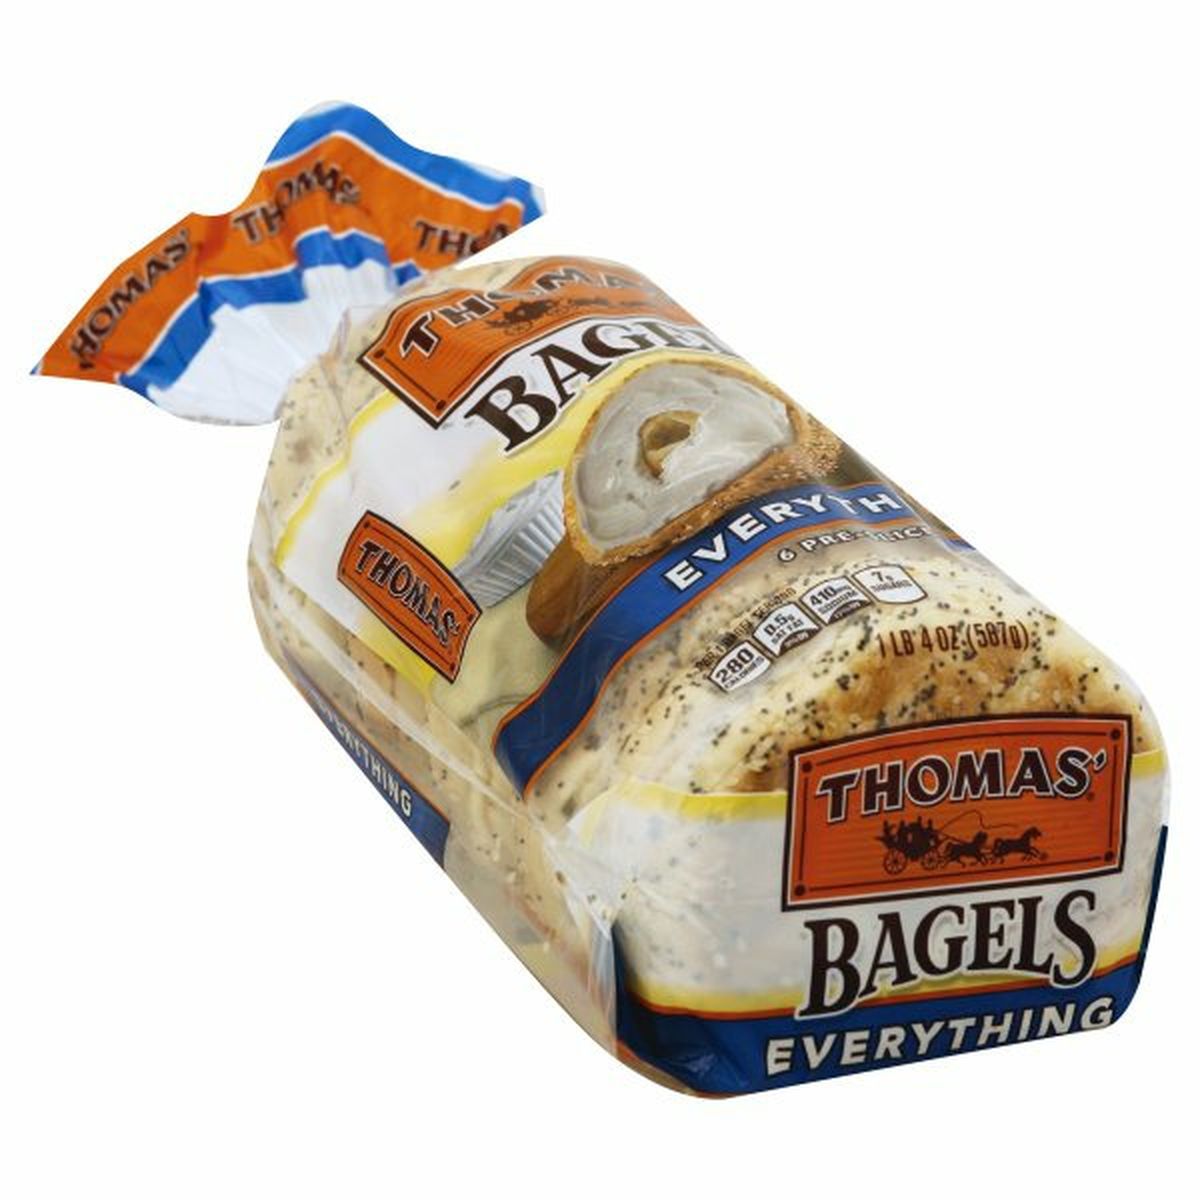 Calories in Thomasâ€™ Bagels, Everything